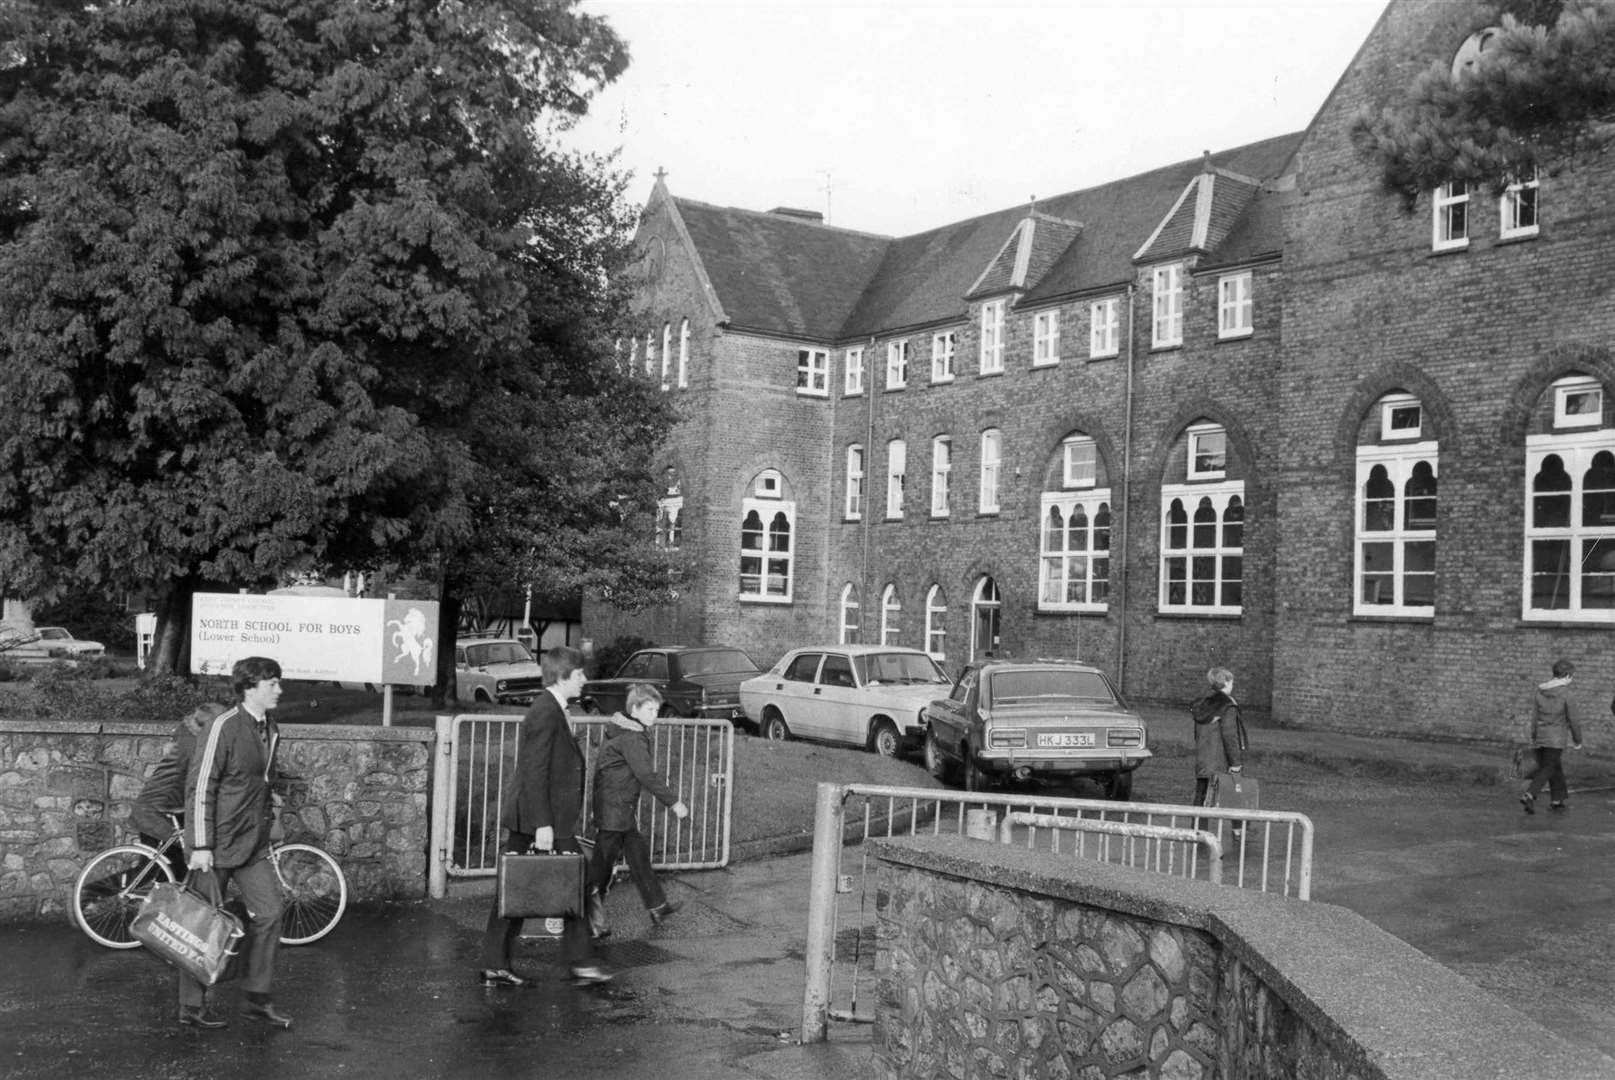 In November 1982 conditions at the North School for Boys (Lower School) in Hythe Road were described as 'disgraceful' by local education watchdogs. Picture: Images of Ashford by Mike Bennett